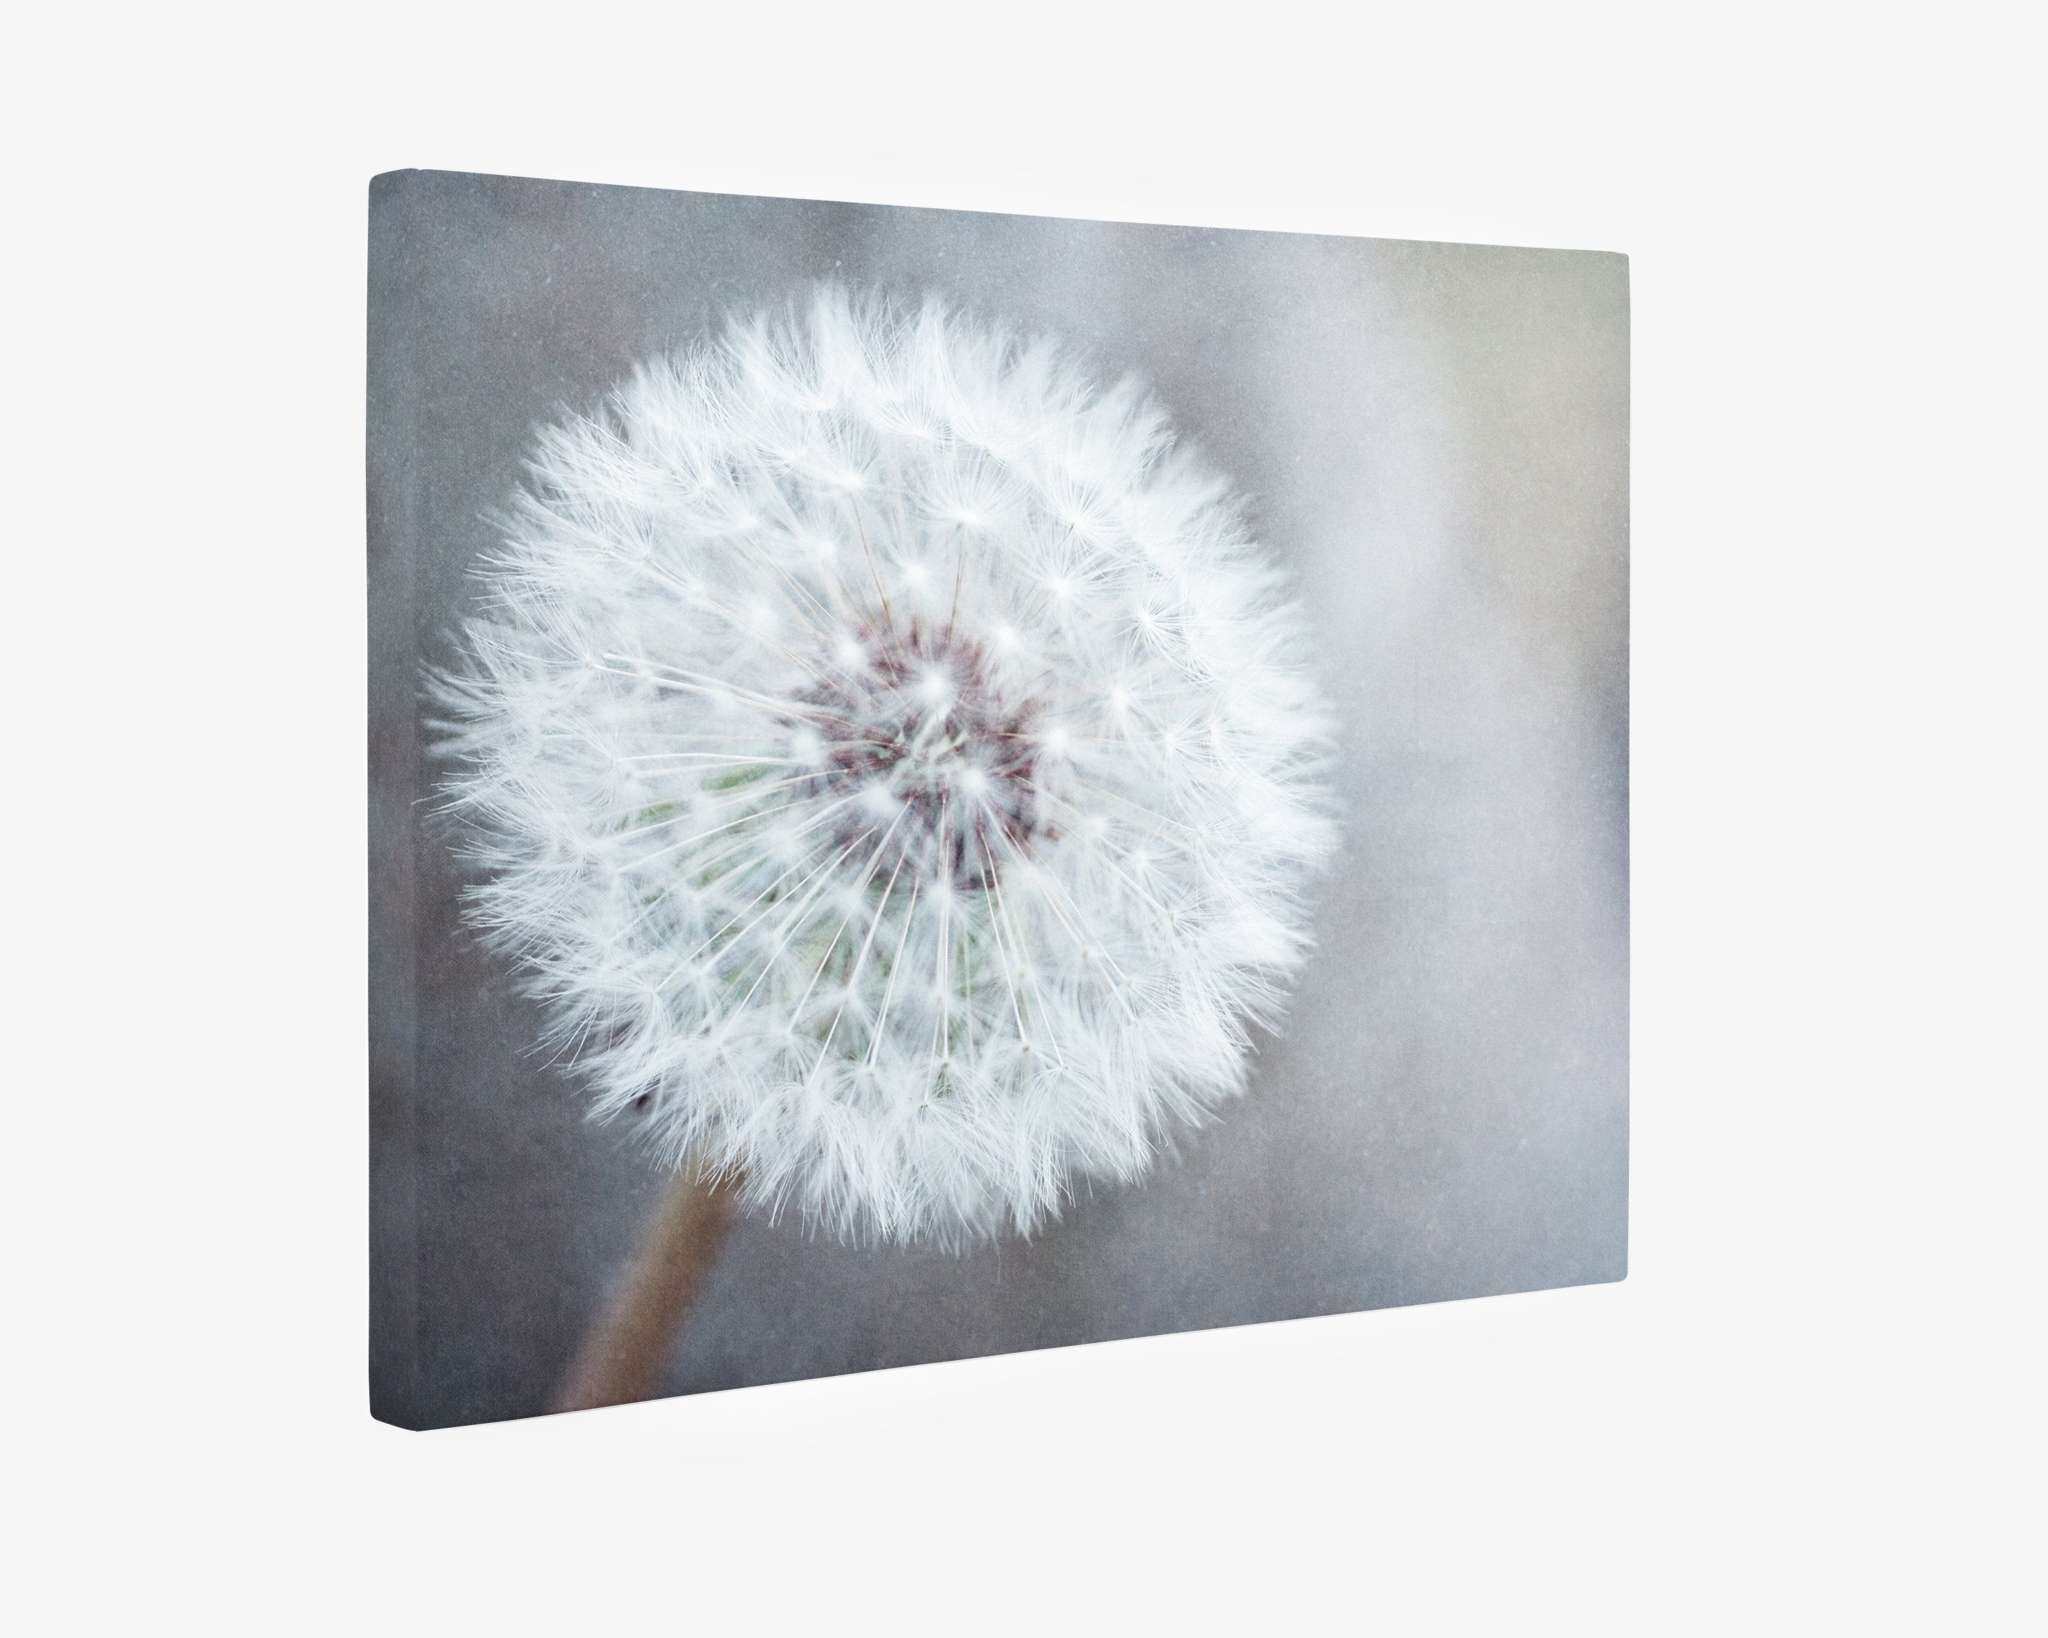 A close-up view of a dandelion seed head against a soft grey background. The delicate white seeds are clearly visible, radiating from the center of the flower. This ready-to-hang Offley Green Botanical Canvas Prints (Multiple Designs) - 11x14 inches is set on a square canvas gallery wrap with slightly blurred edges, perfect for any nature lover's décor.